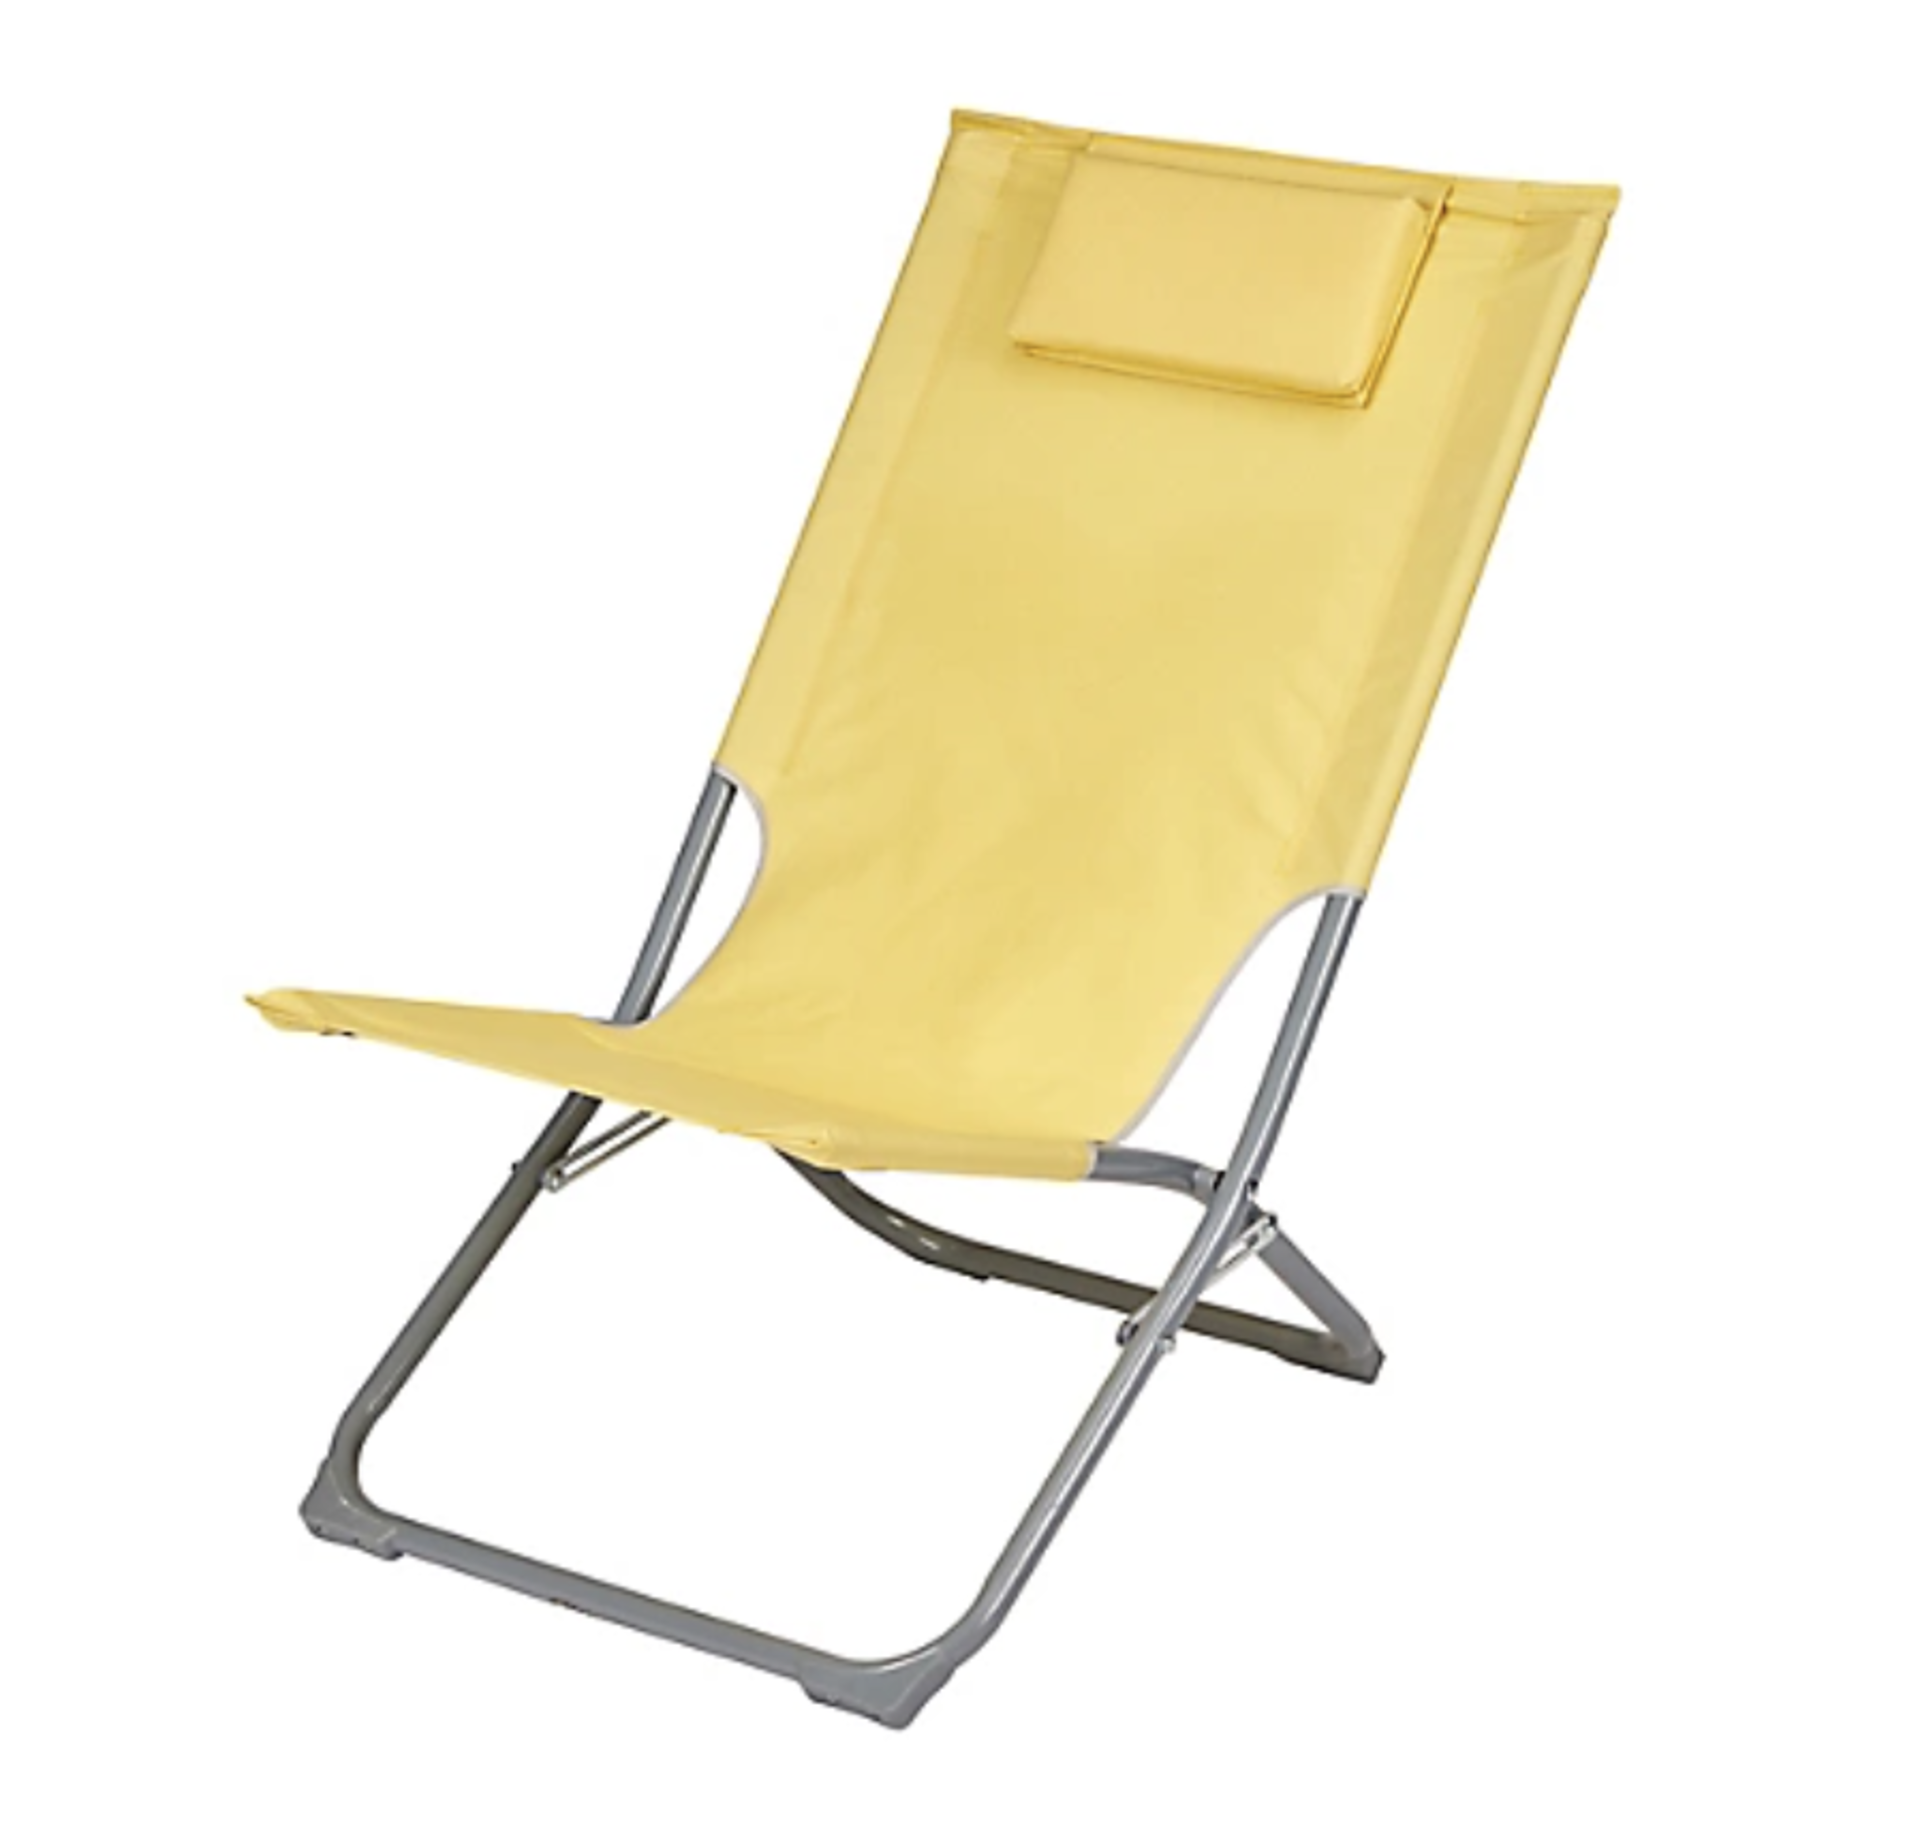 CURACAO BEACH CHAIR STEEL CREAM GOLD Â£13.54Condition ReportAppraisal Available on Request- All